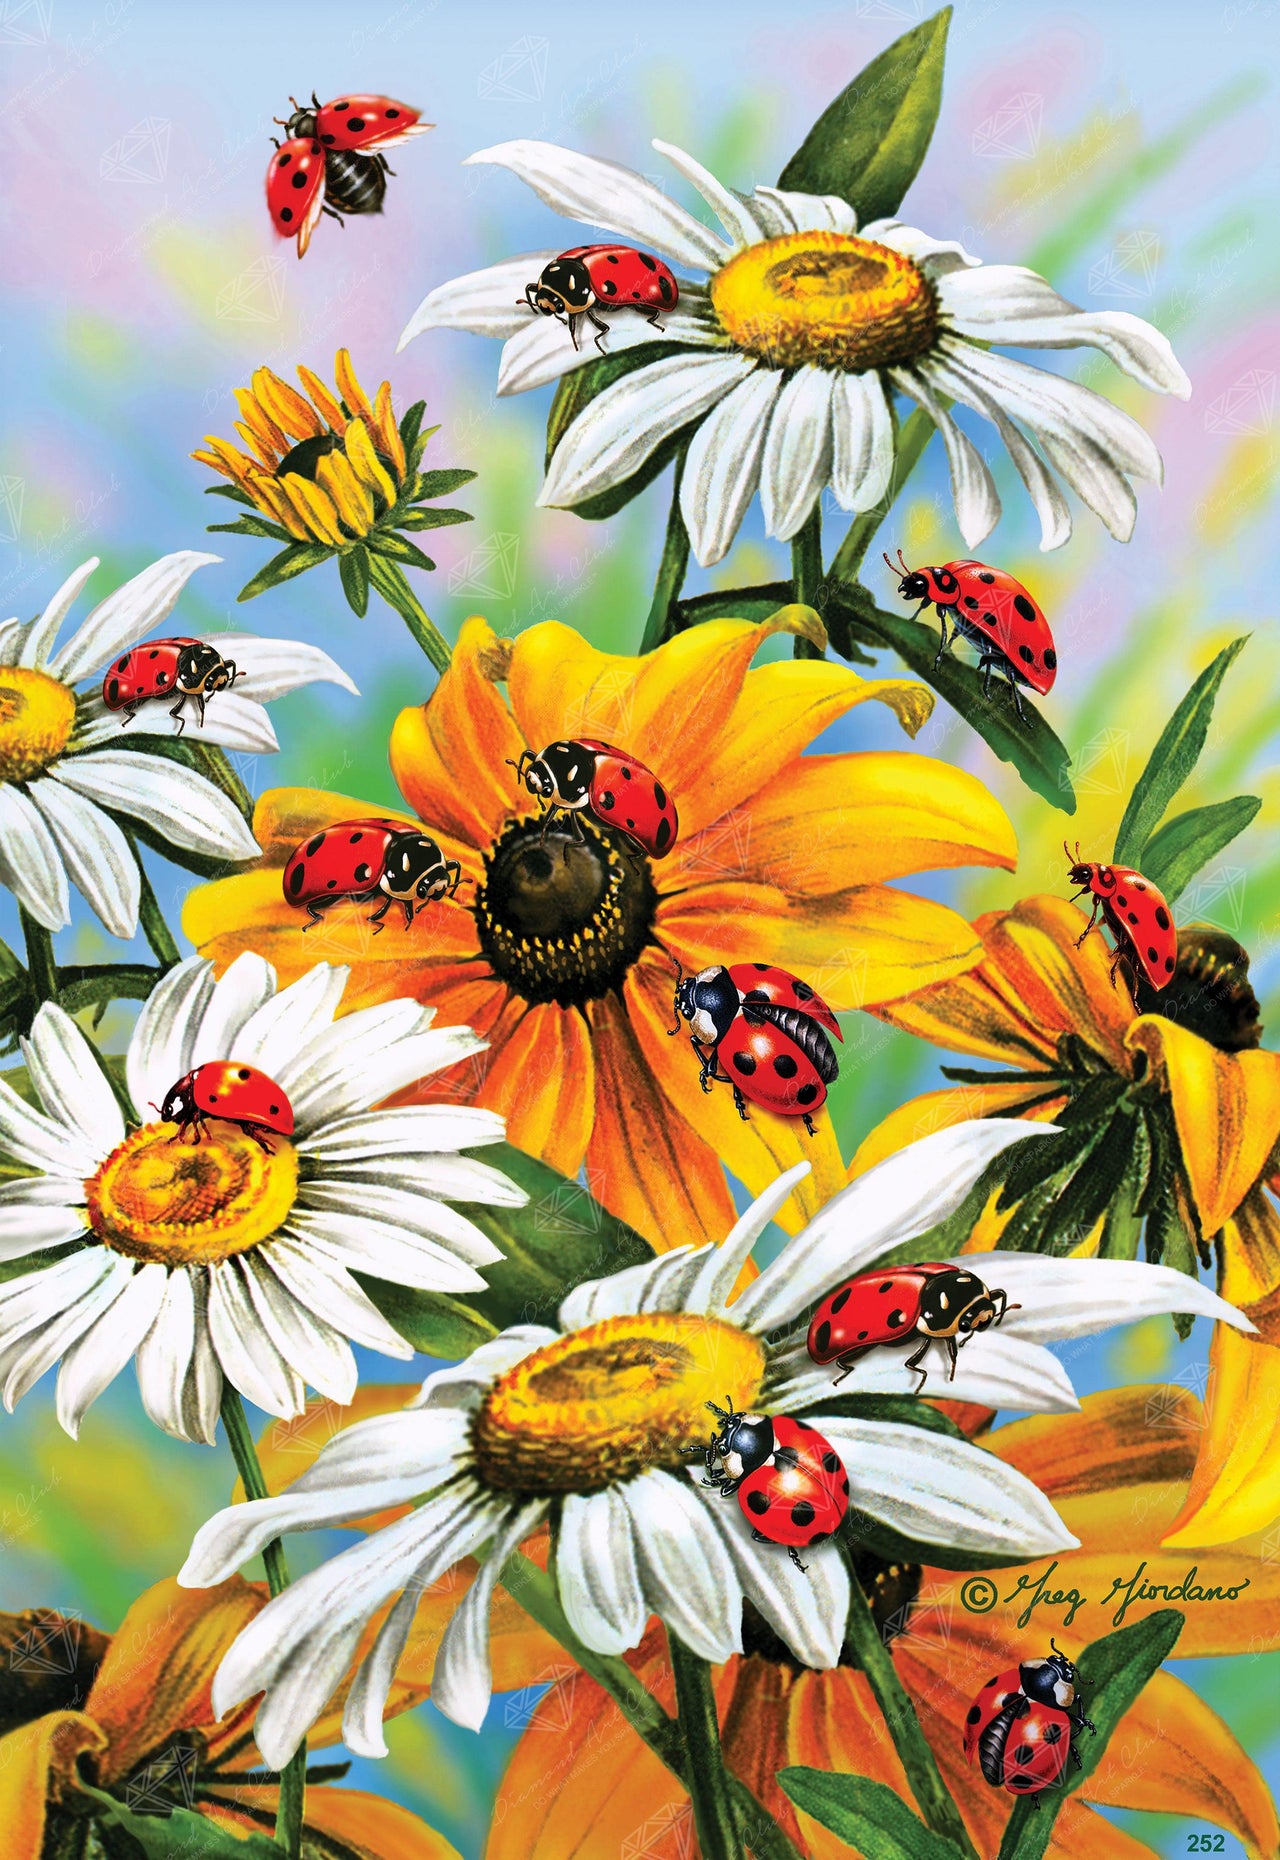 Diamond Painting Ladybug on Sunflower 20" x 29" (50.7cm x 73.7cm) / Round with 40 Colors including 3 ABs / 47,603